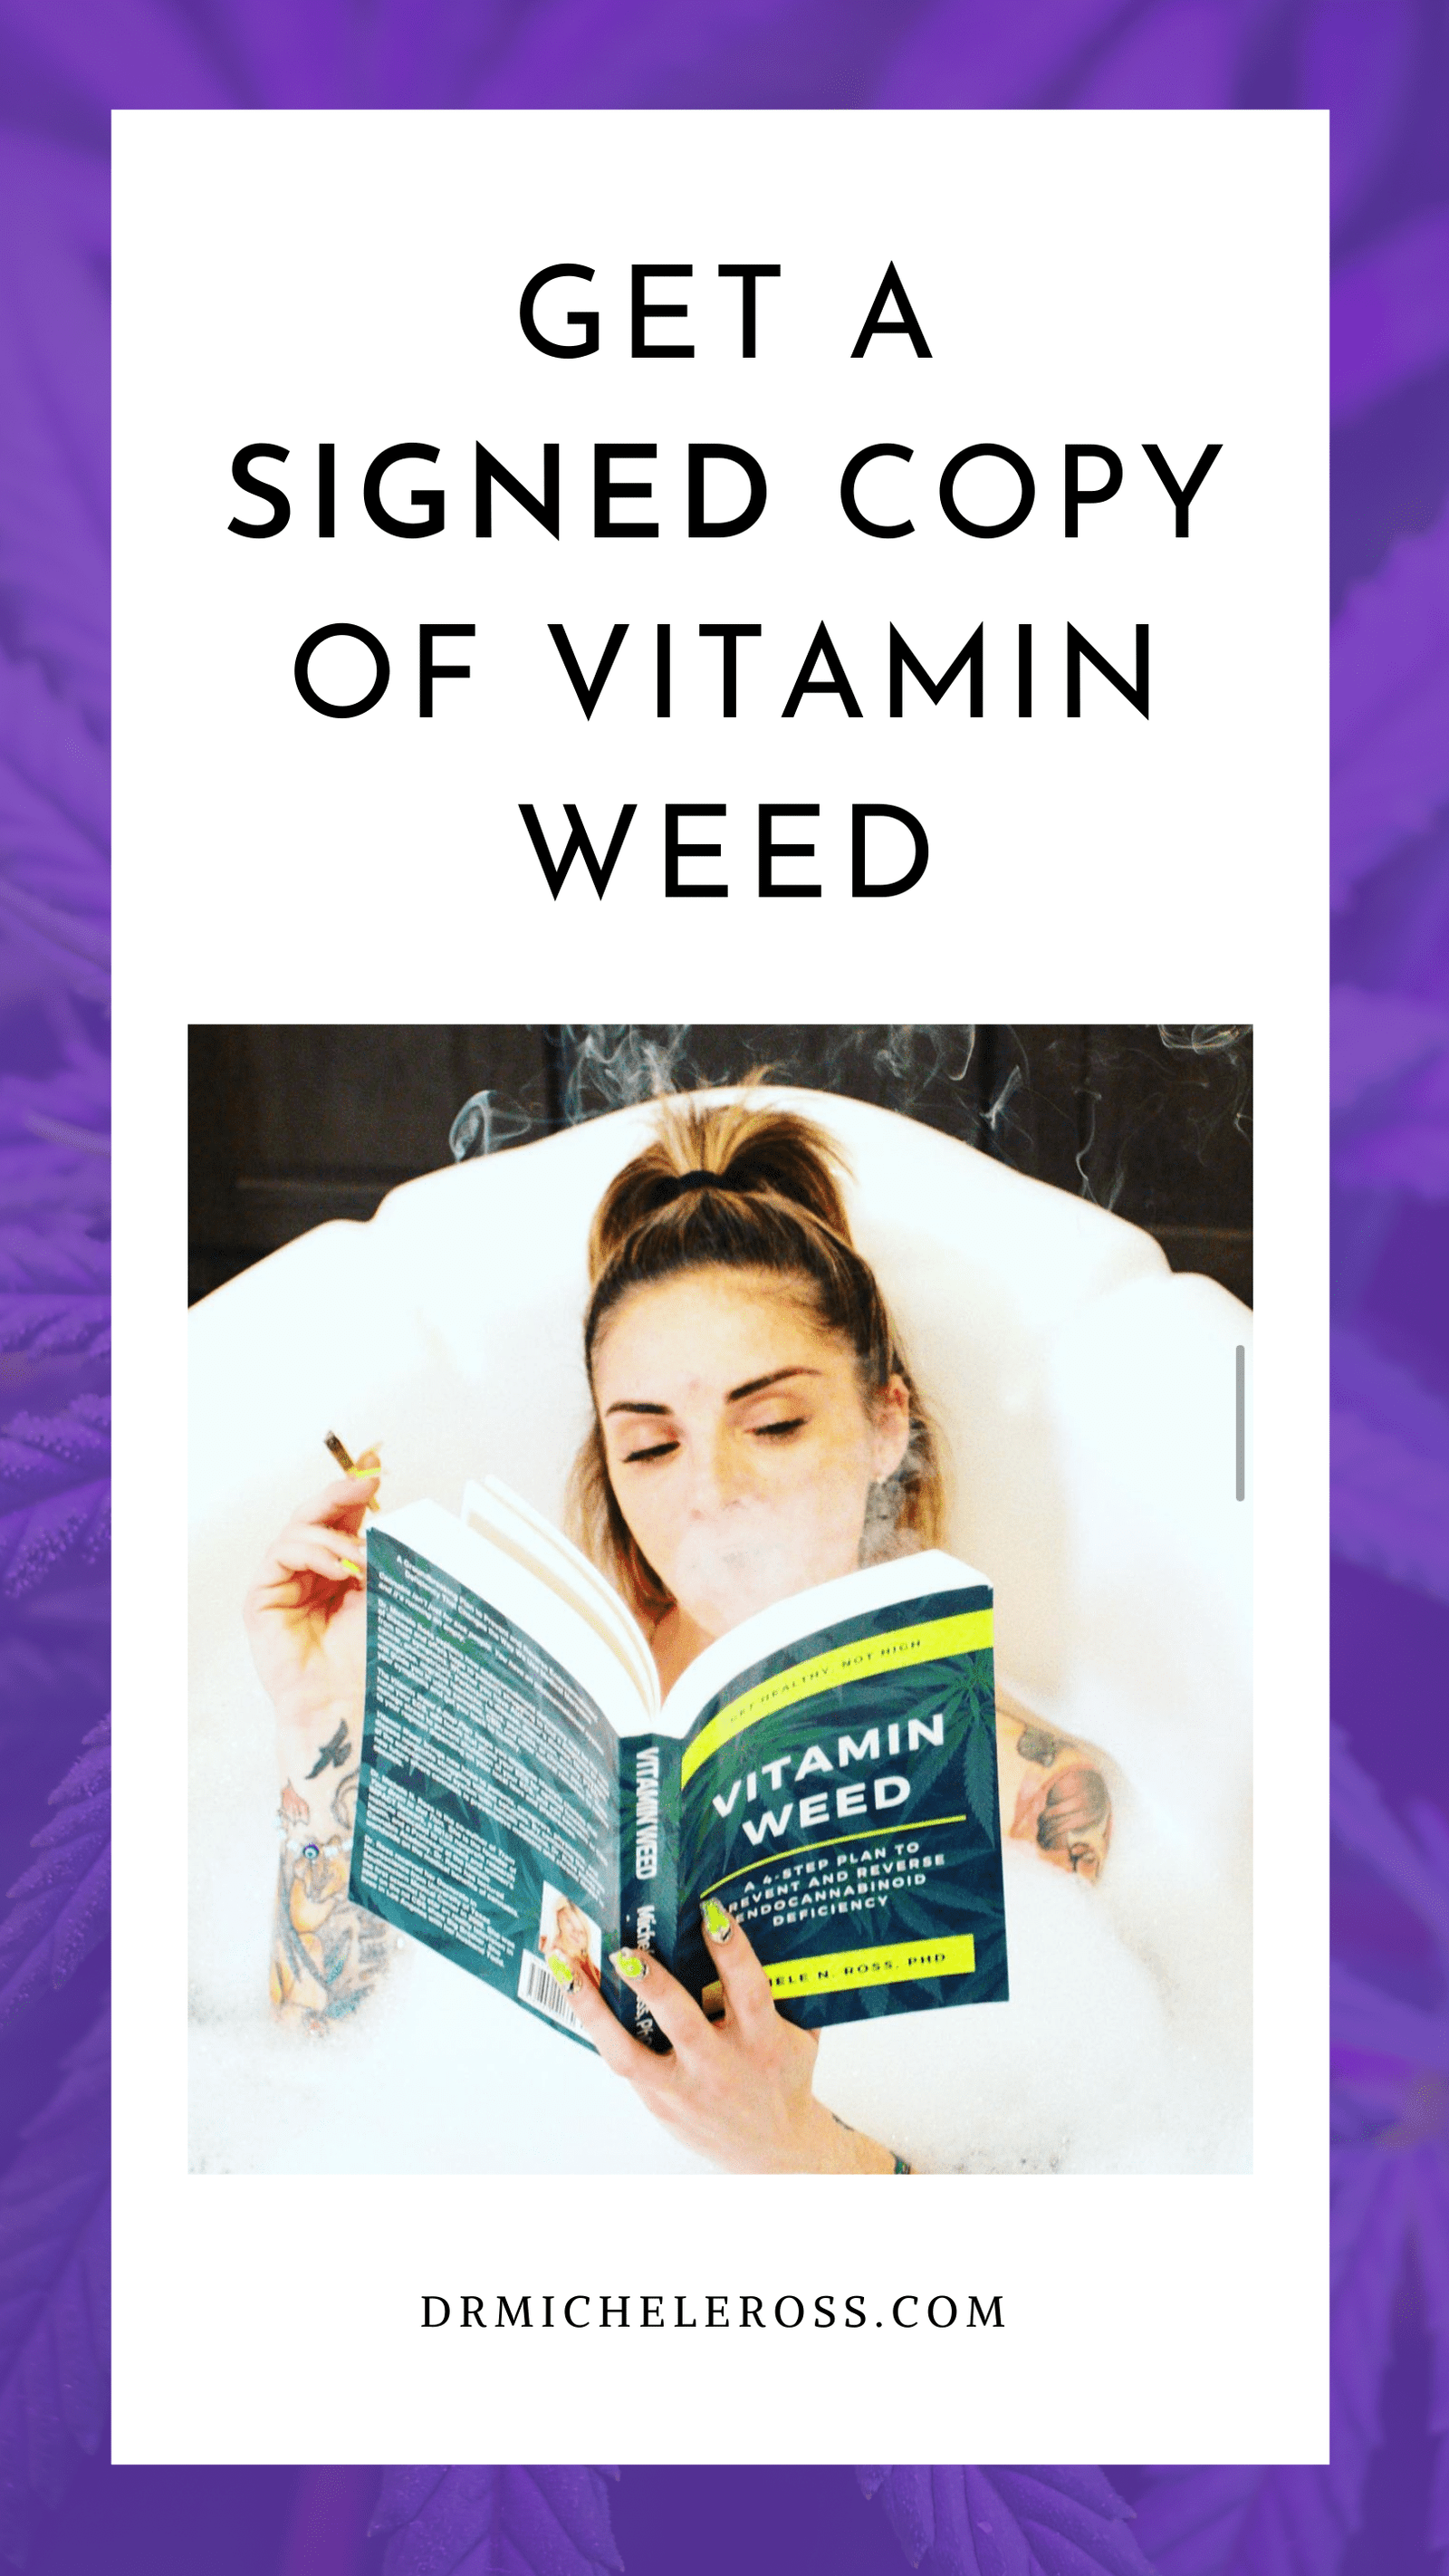 young woman reading vitamin weed book in bath tub while smoking a joint